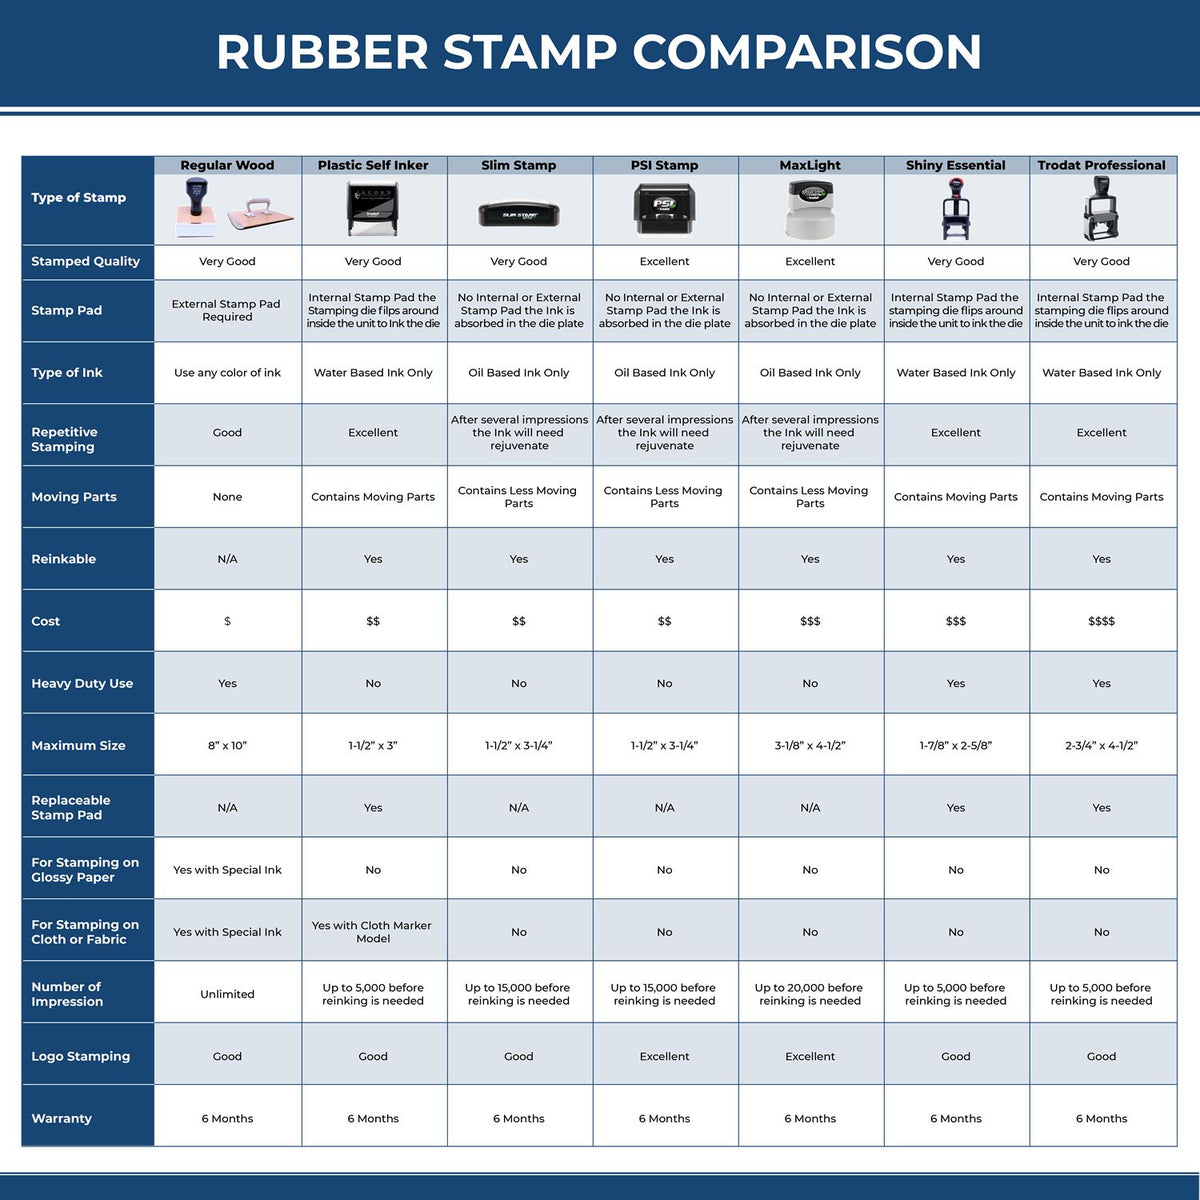 A comparison chart for the different types of mount models available for the Slim Pre-Inked Maryland Architect Seal Stamp.